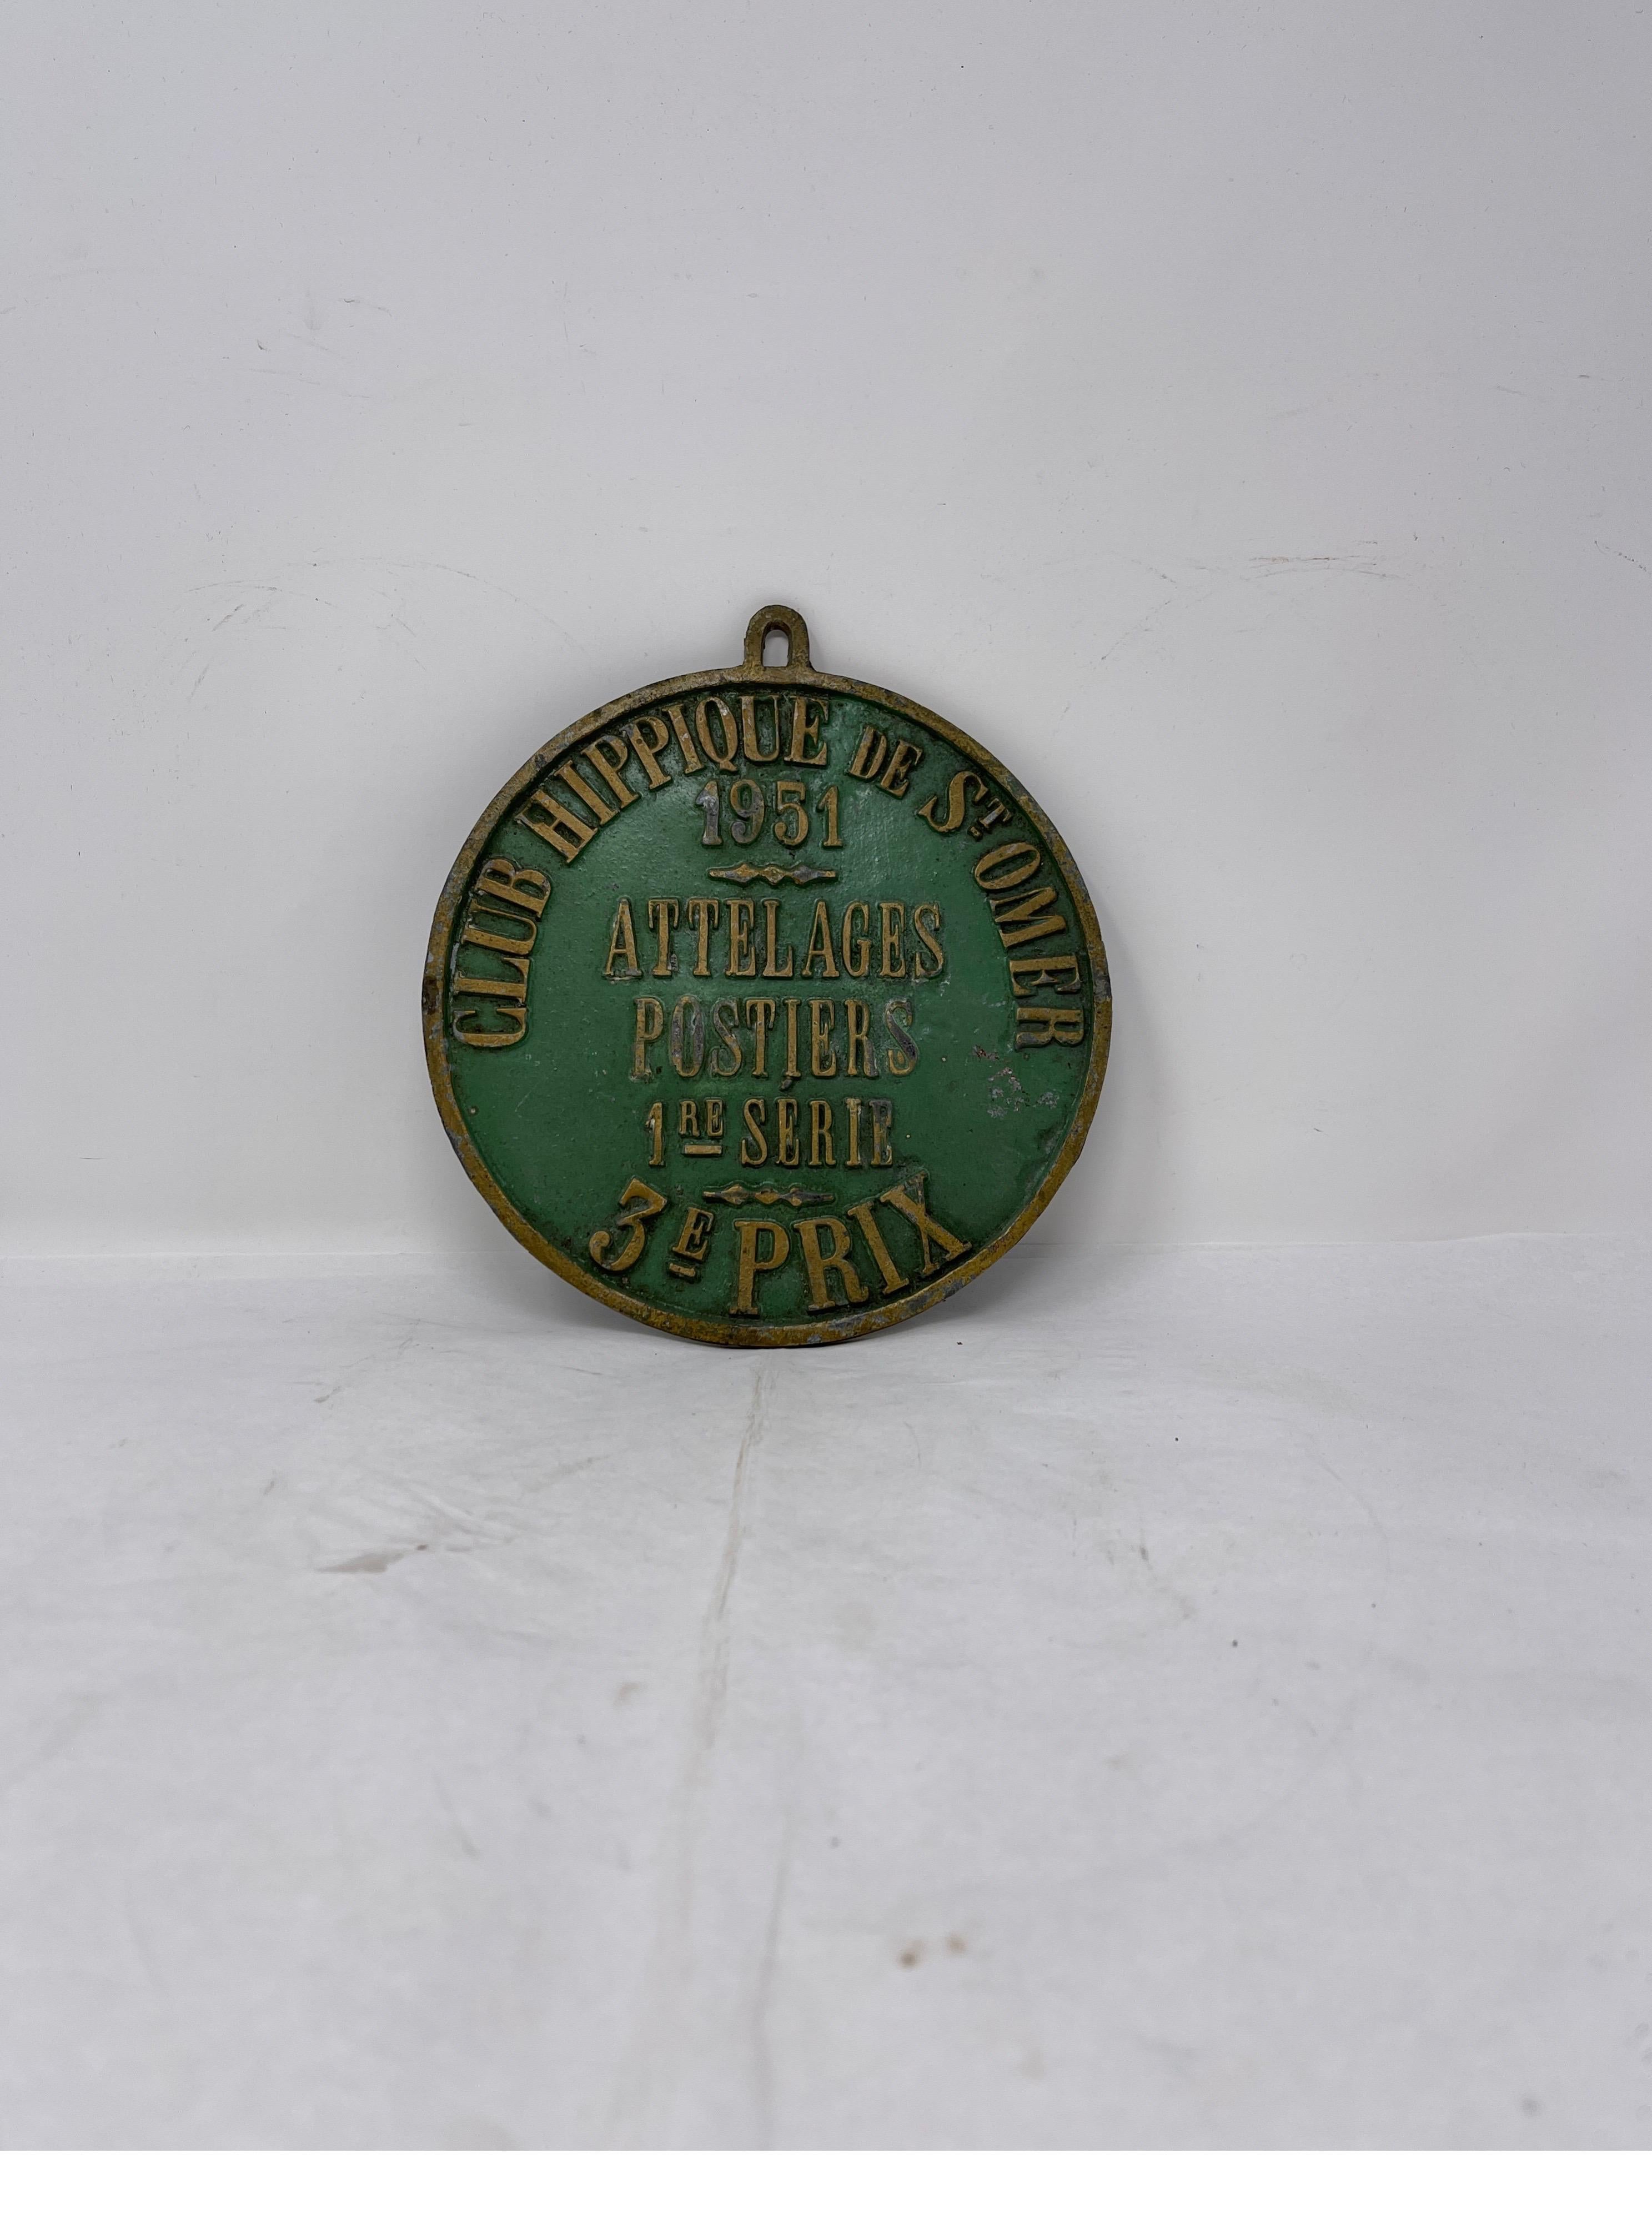 This metal horse show 1951 trophy was for Harness racing. This the regal green trophy embossed with brass trim and lettering would look awesome on any study wall or used as a decorative element in a bookshelf.



Measures: 6 1/2